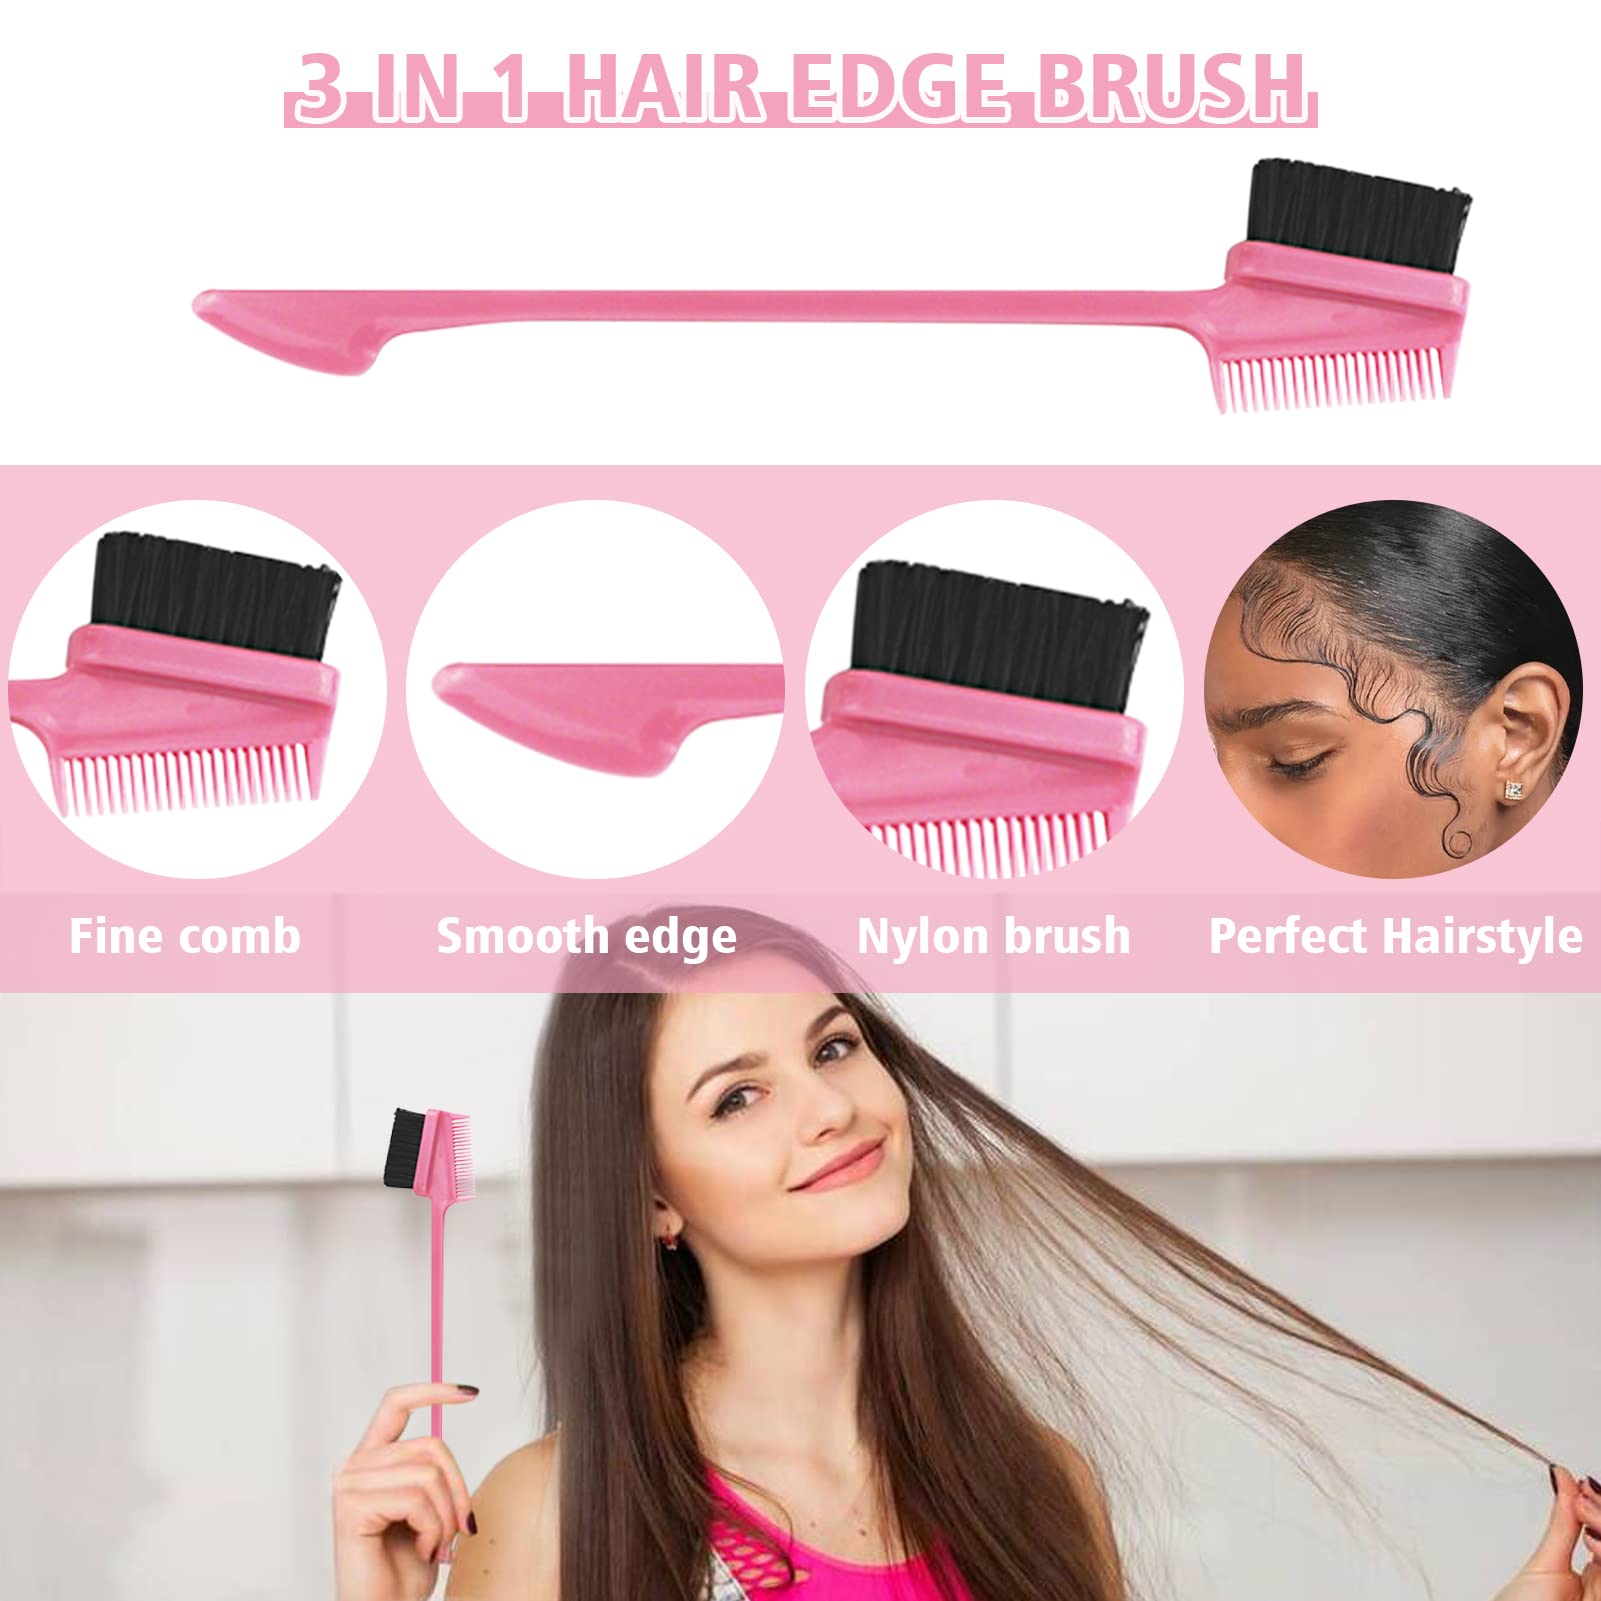 8 Pieces Hair Styling Comb Set for Edge&Back Brushing, Combing, Slicking Hair